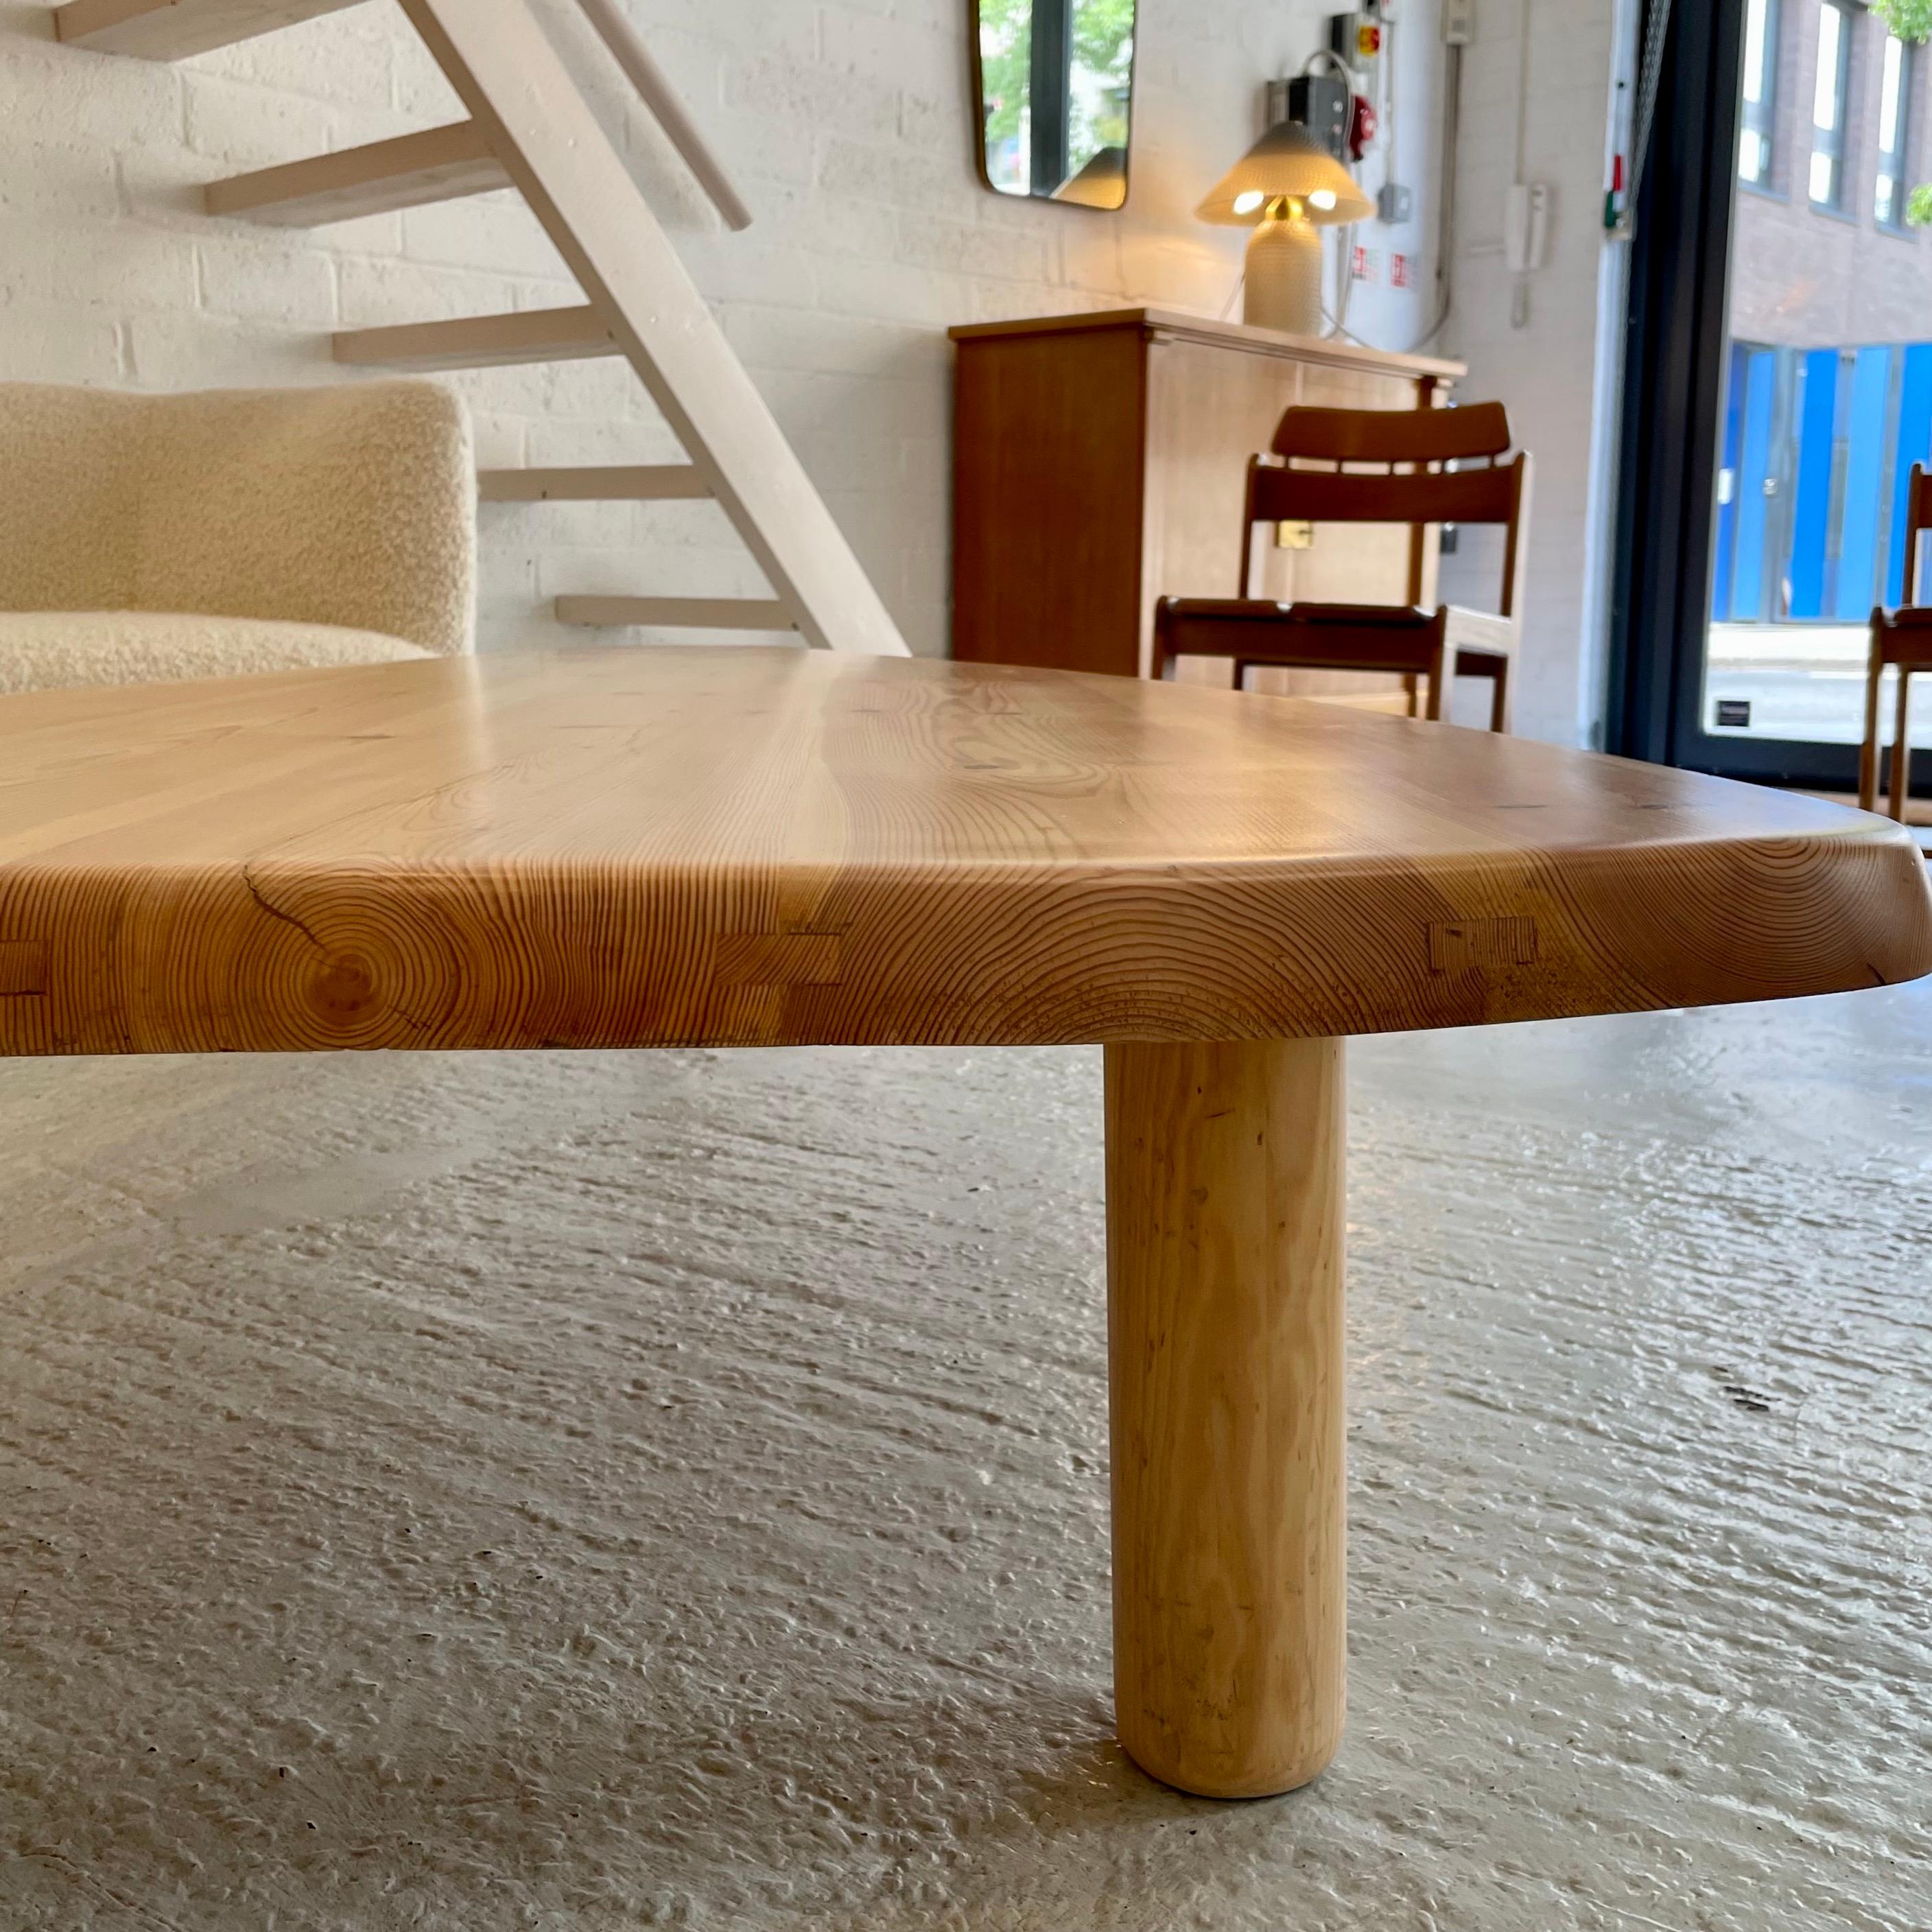 French Pine Coffee Table In Good Condition For Sale In London, England